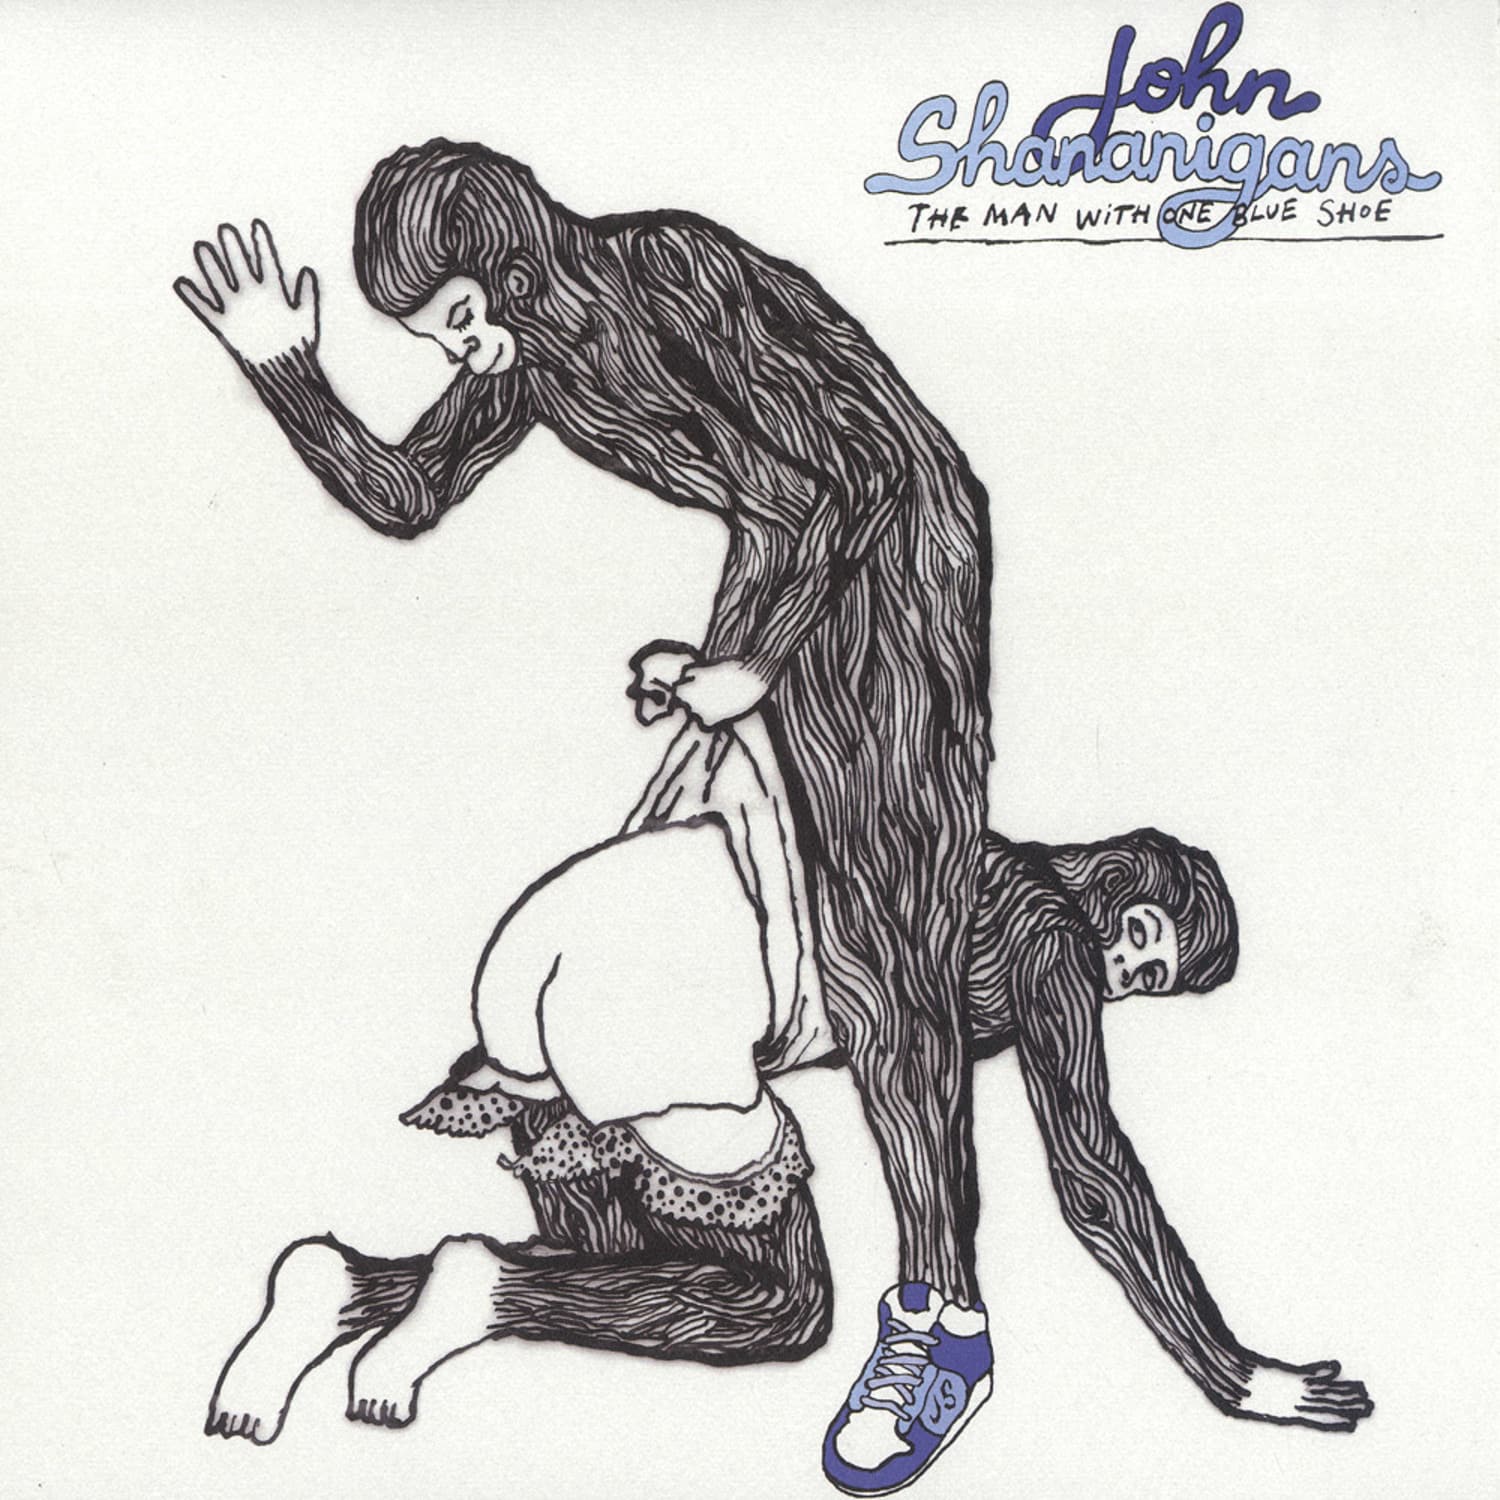 John Shananigans - THE MAN WITH ONE BLUE SHOE